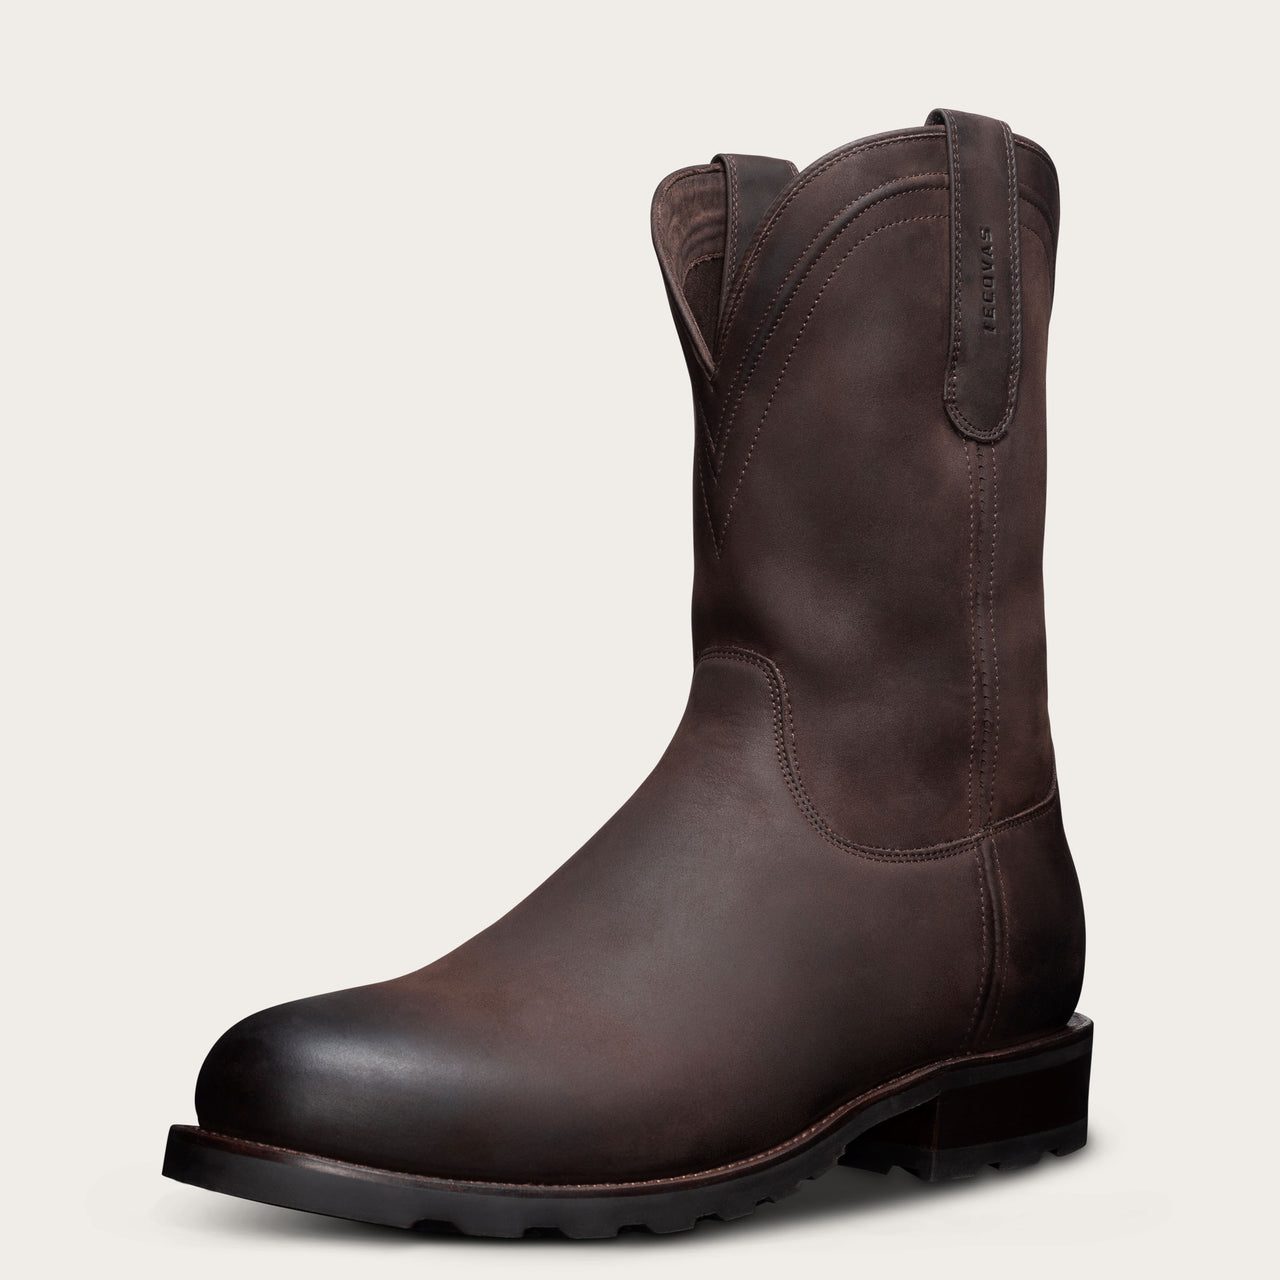 Men's Roper Work Boot - Oiled Leather Ranch Boots | The Stockton